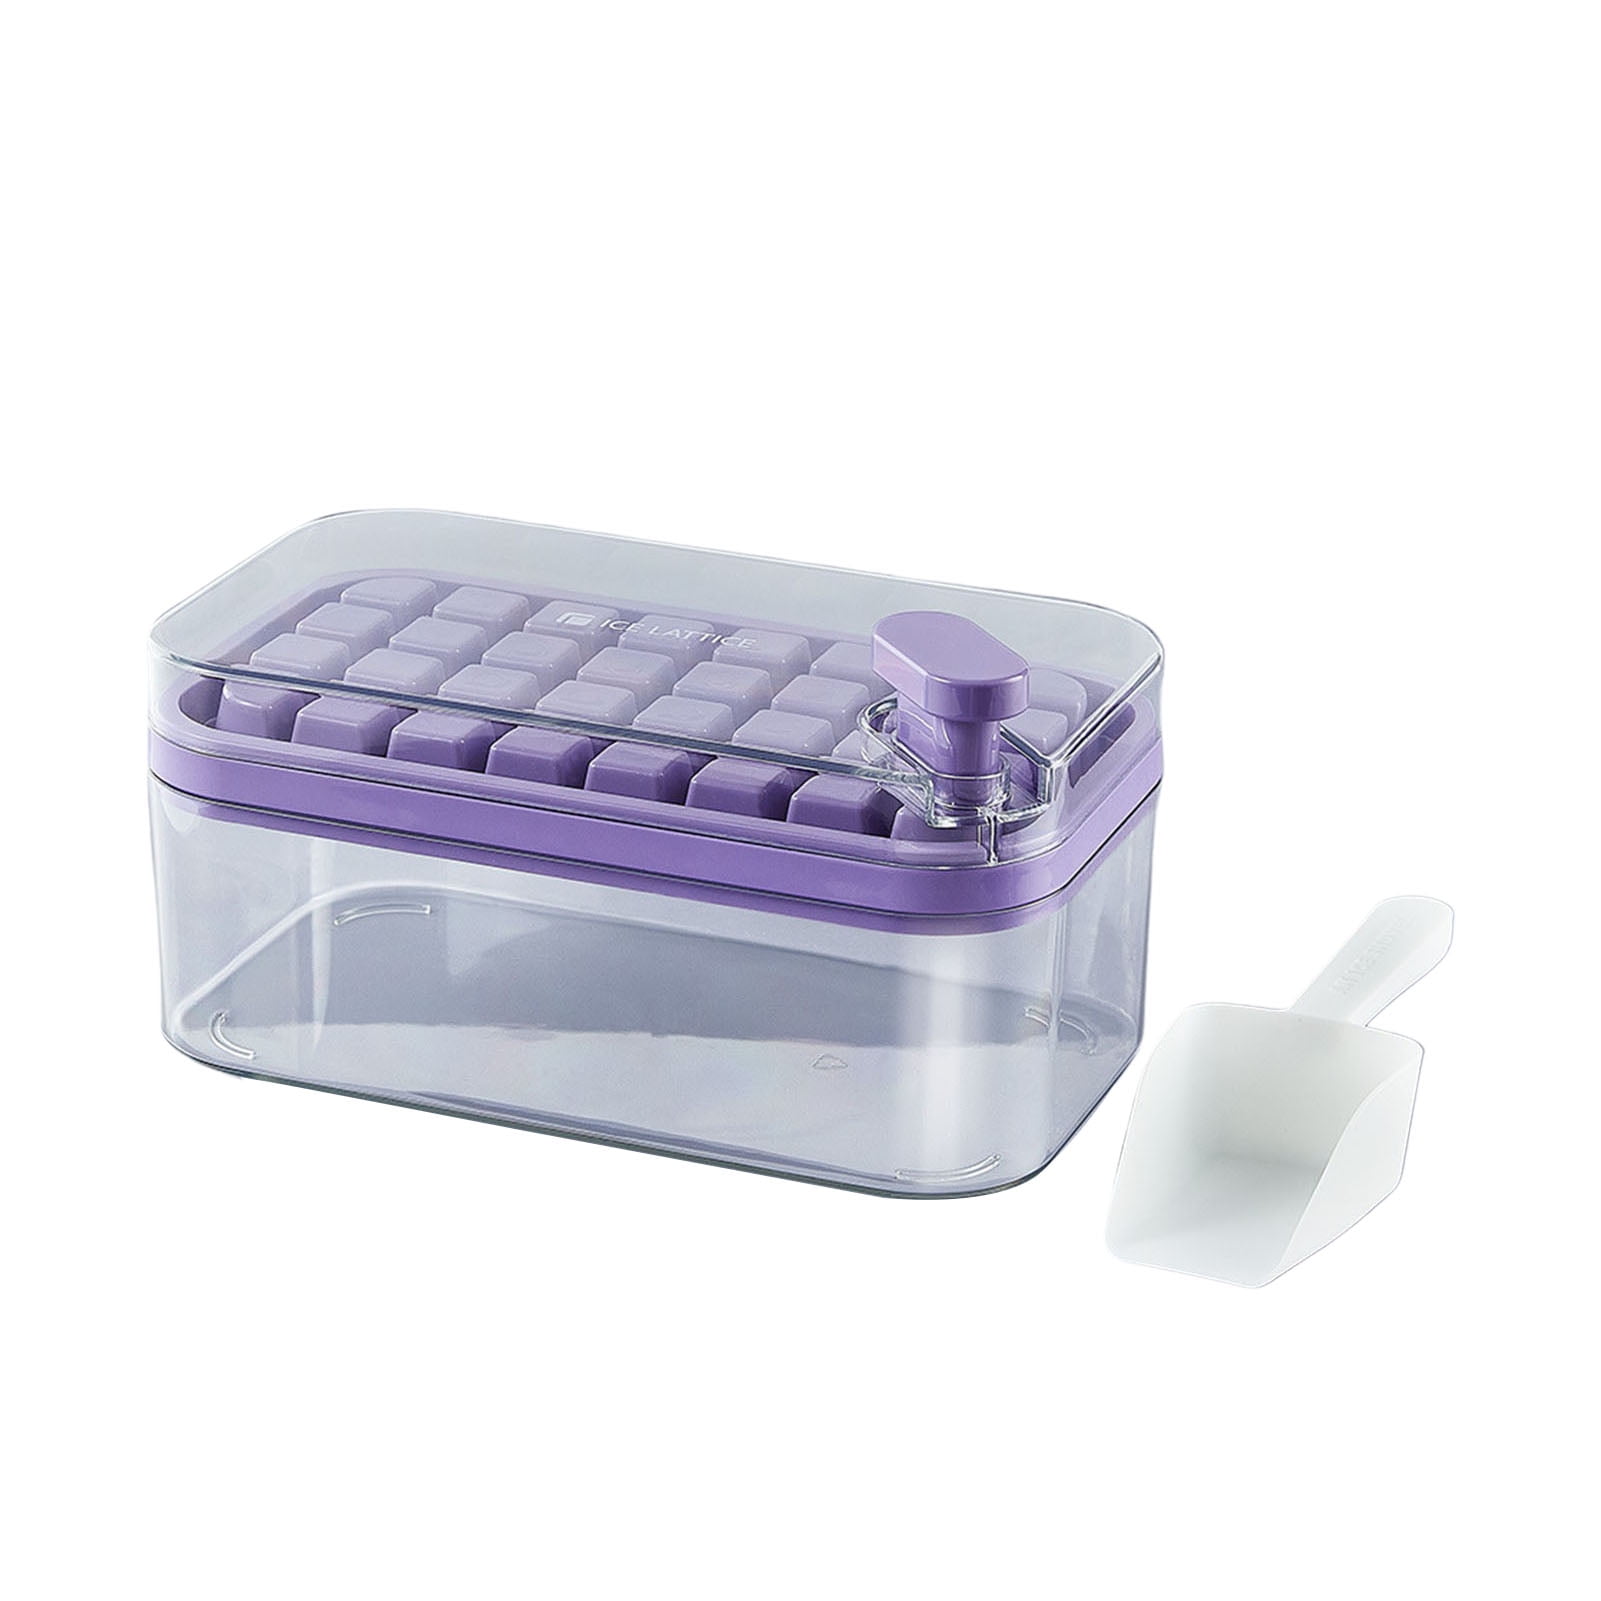 Single Press Release Ice Cube Mold with Bin, Lid and Scoop (Purple)